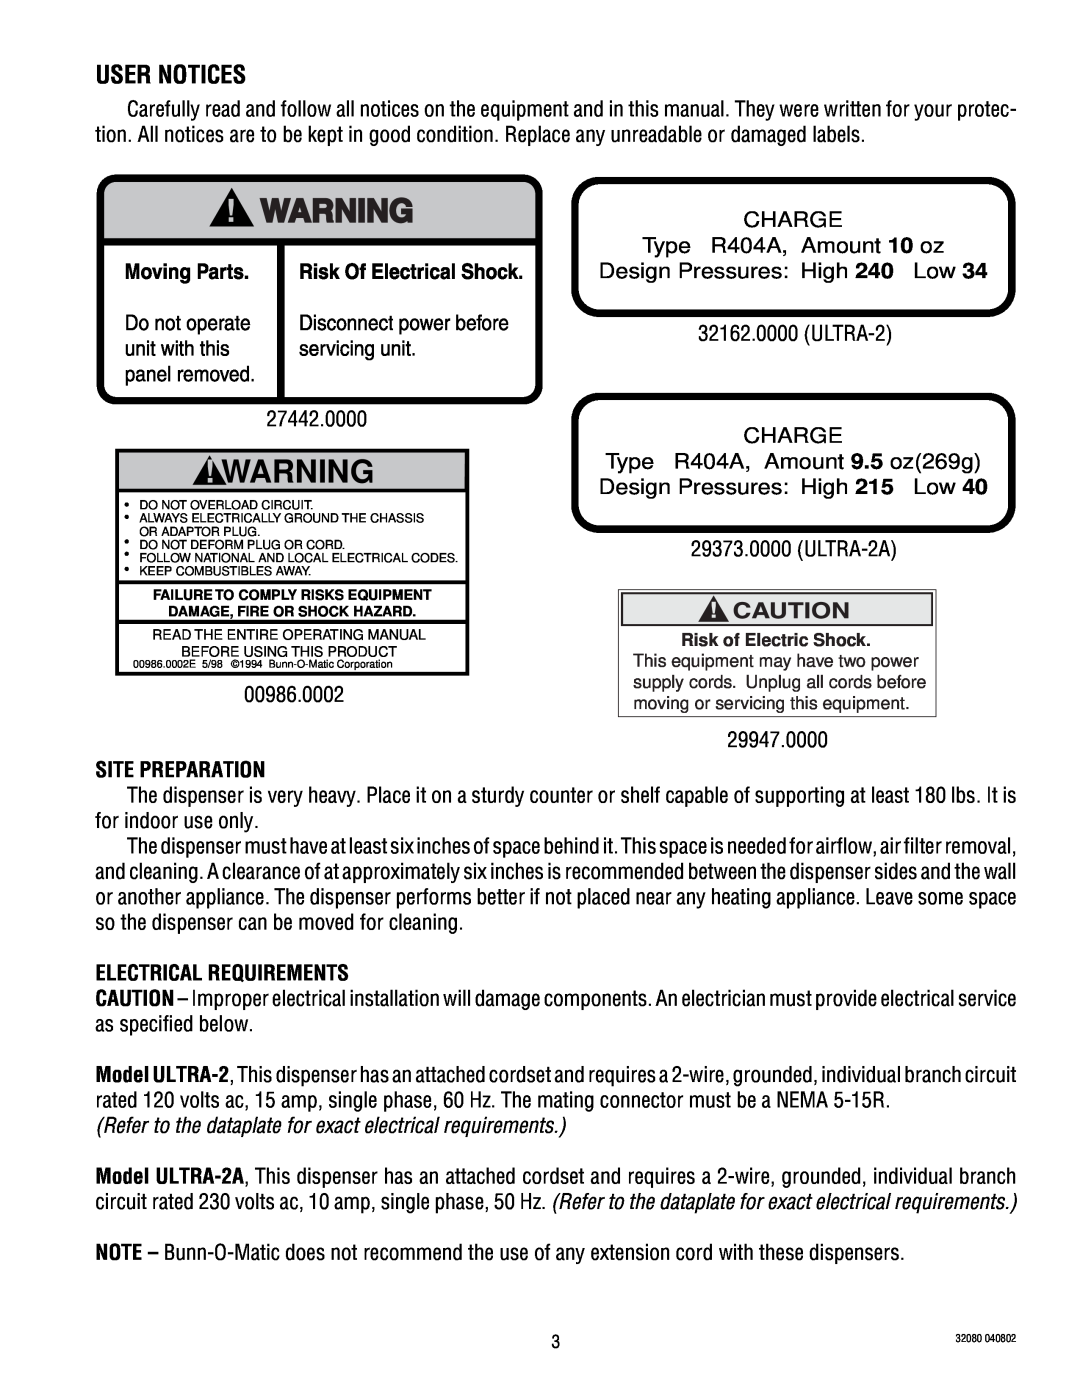 Bunn ULTRA-2 manual User Notices, Site Preparation, Electrical Requirements 